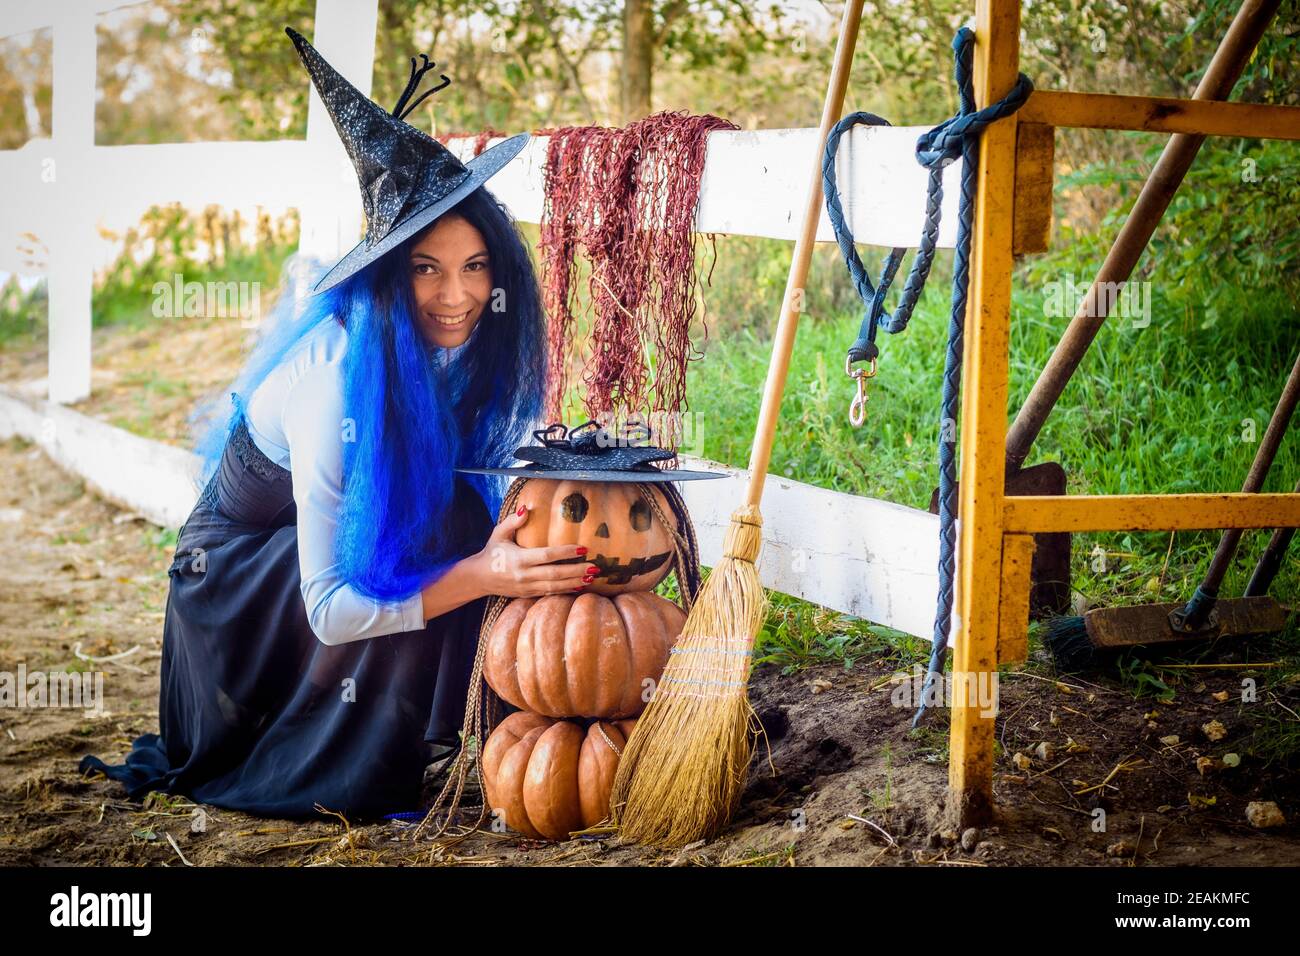 A girl in a witch costume, celebrating Halloween, sat down by a pumpkin with a drawn malicious grimace Stock Photo